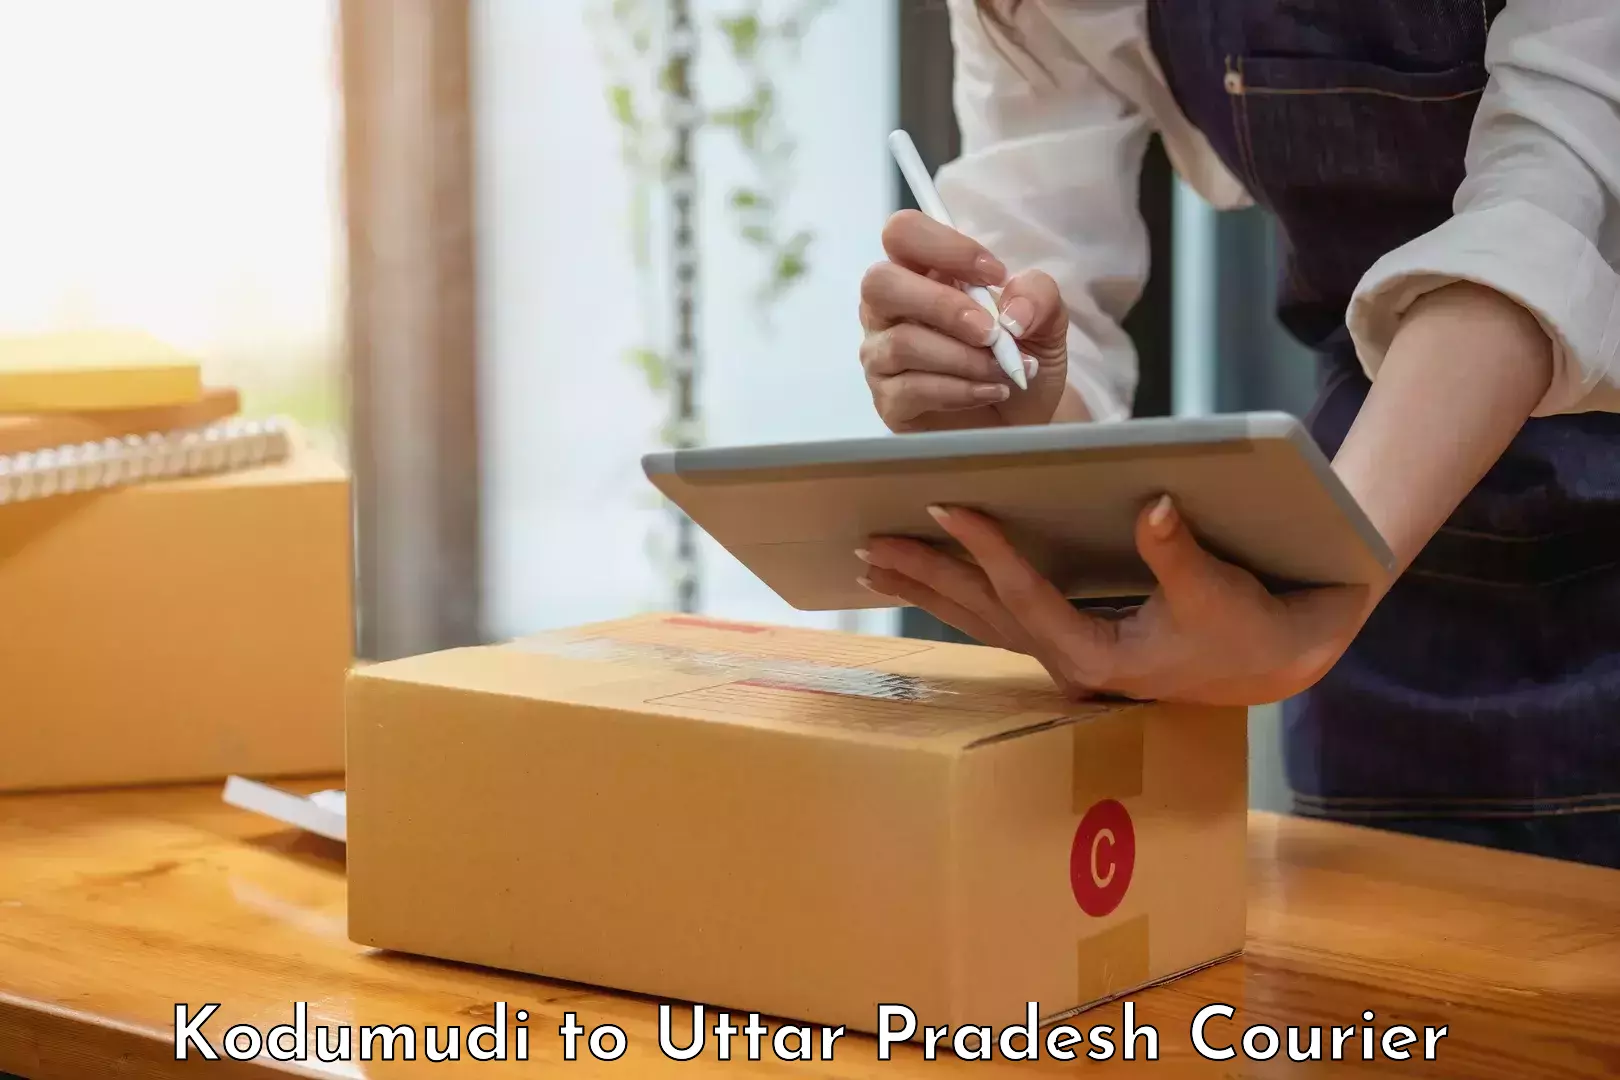 State-of-the-art courier technology Kodumudi to Mariahu